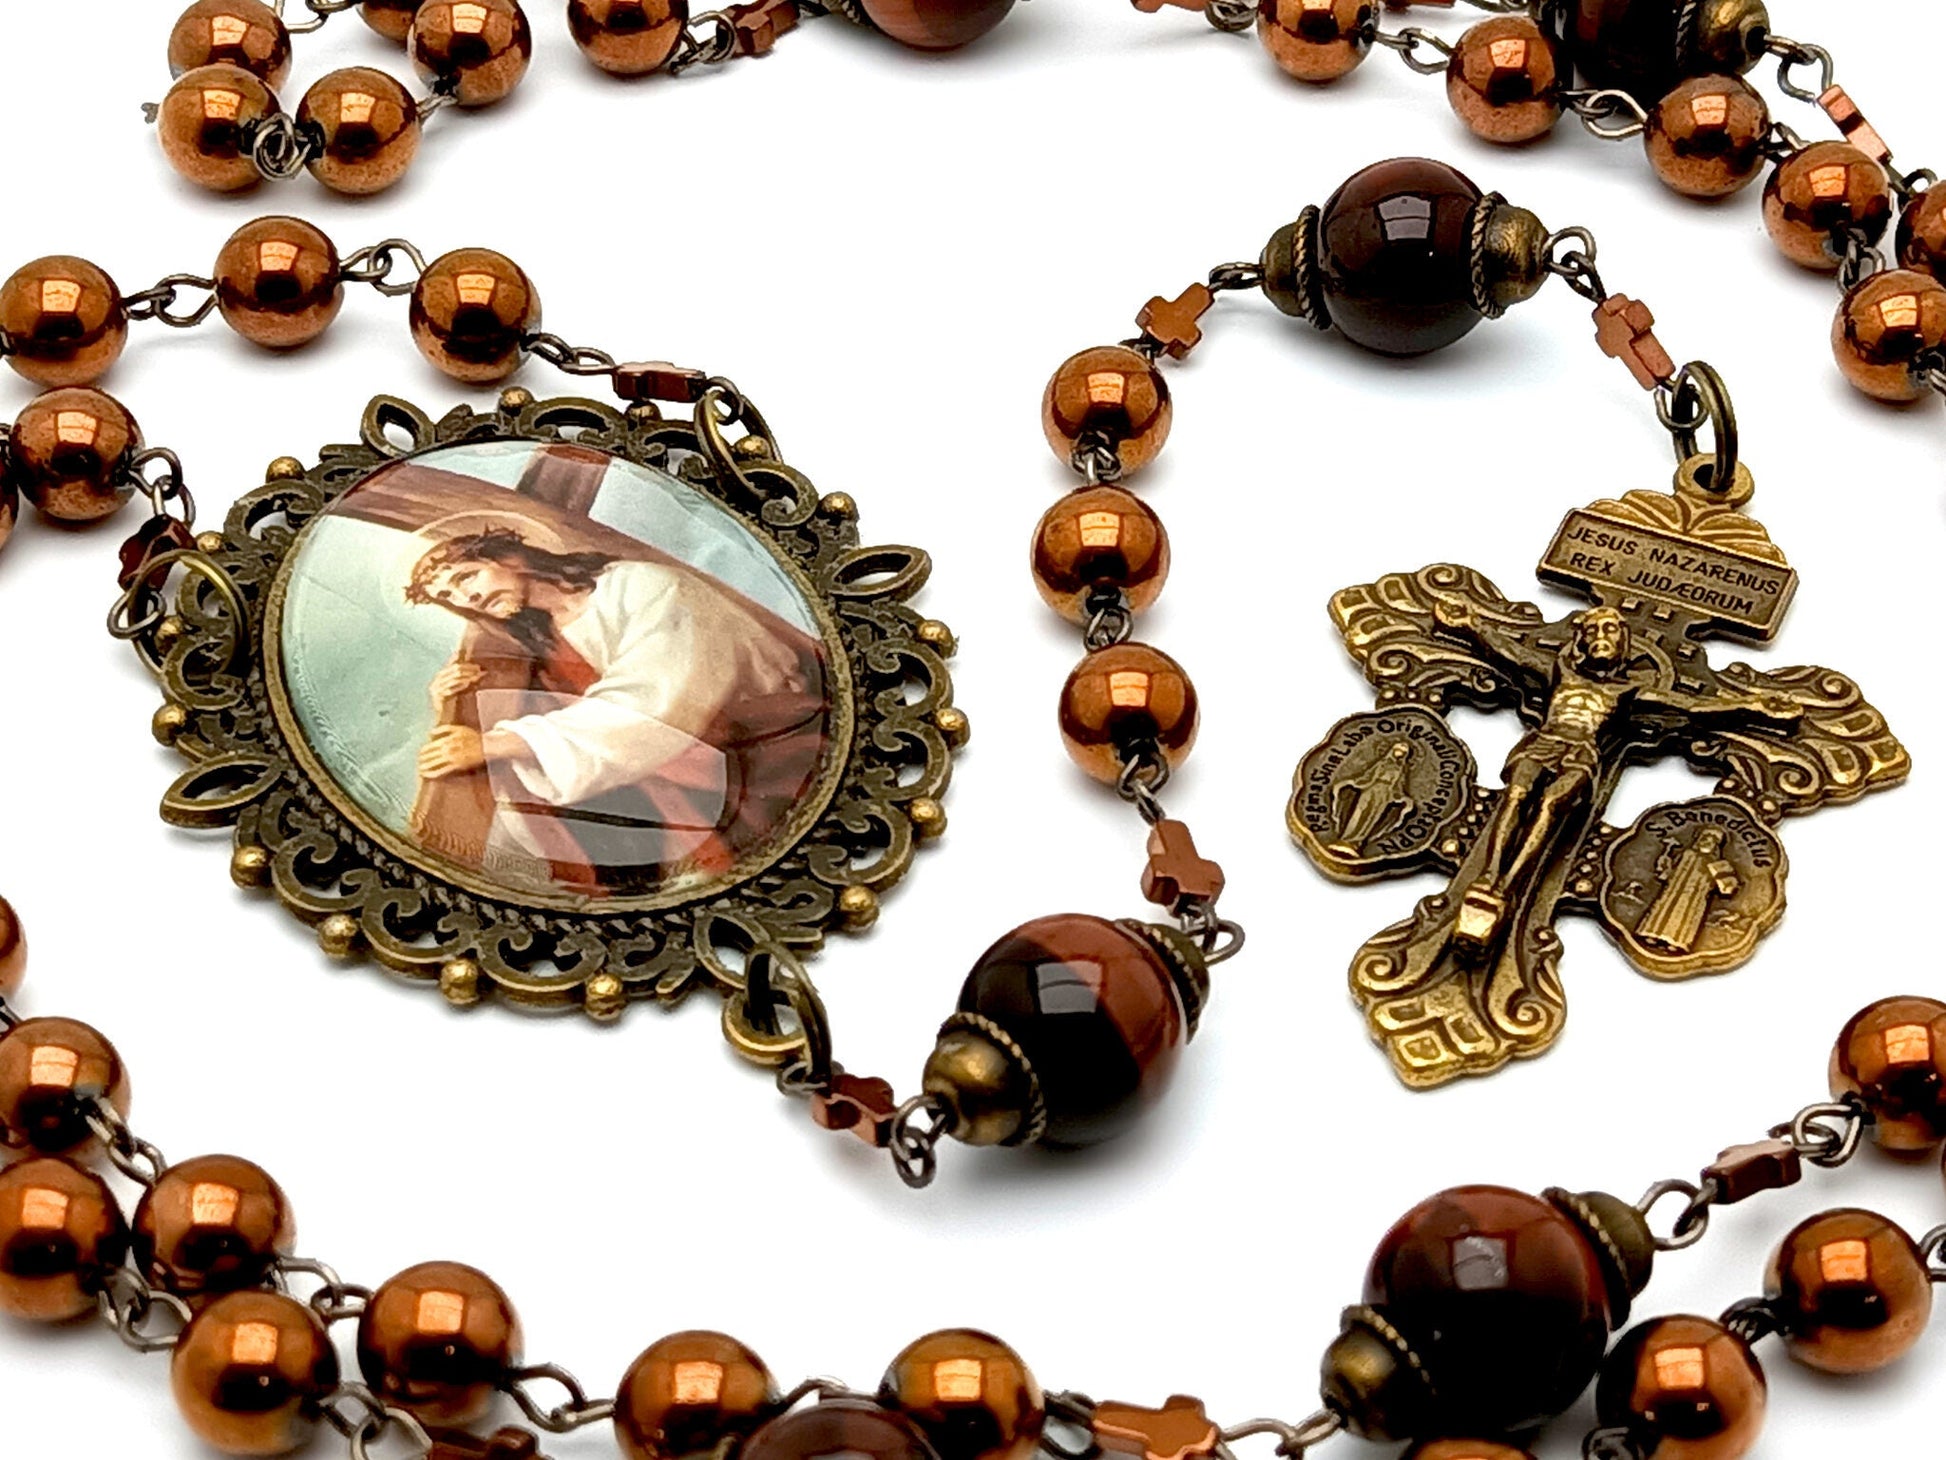 Stations of the Cross unique rosary beads with copper hemetite gemstone beads, bronze pardon crucifix and picture centre medal.